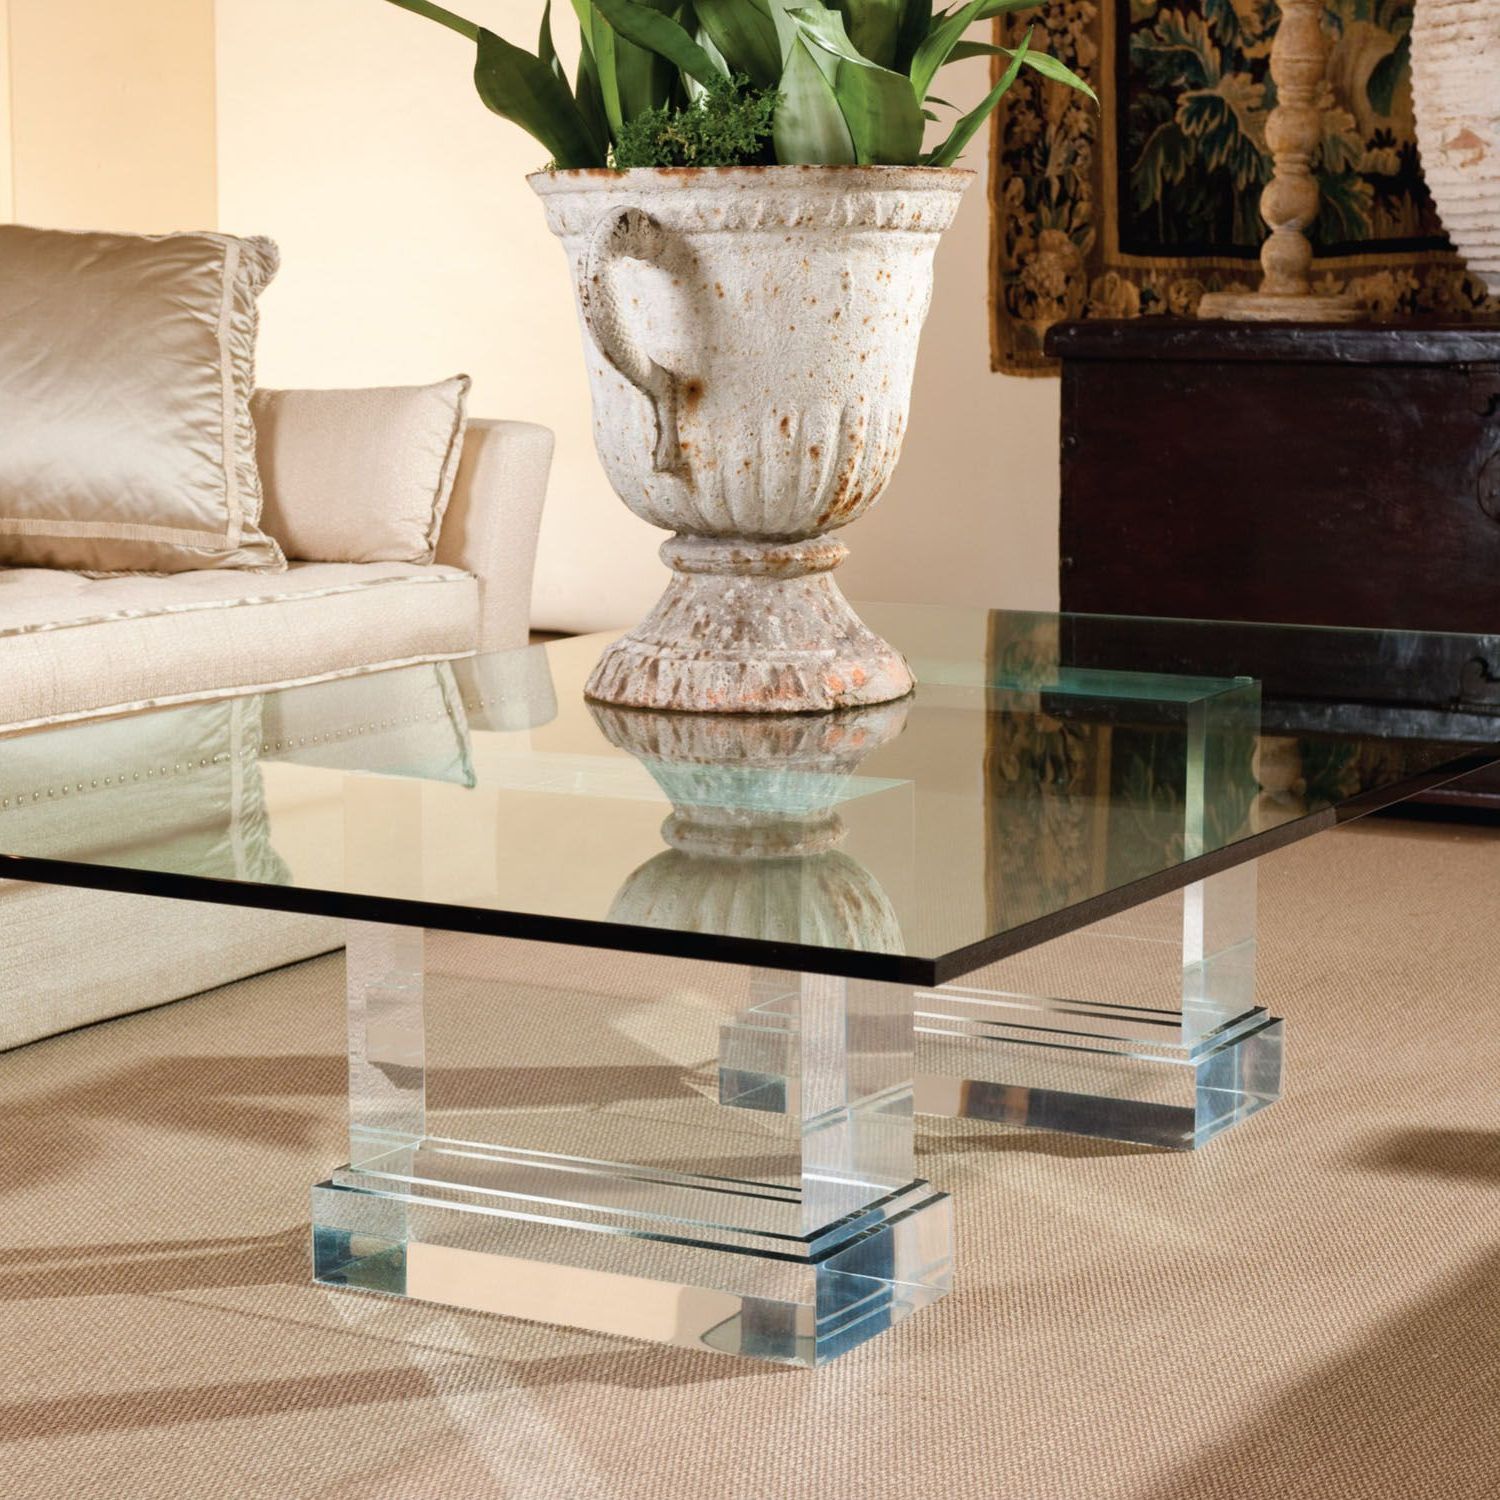 Allan Knightacrylic | Cocktail Tables | Apollo Cocktail Table Pedestal In Rectangular Coffee Tables With Pedestal Bases (View 17 of 20)